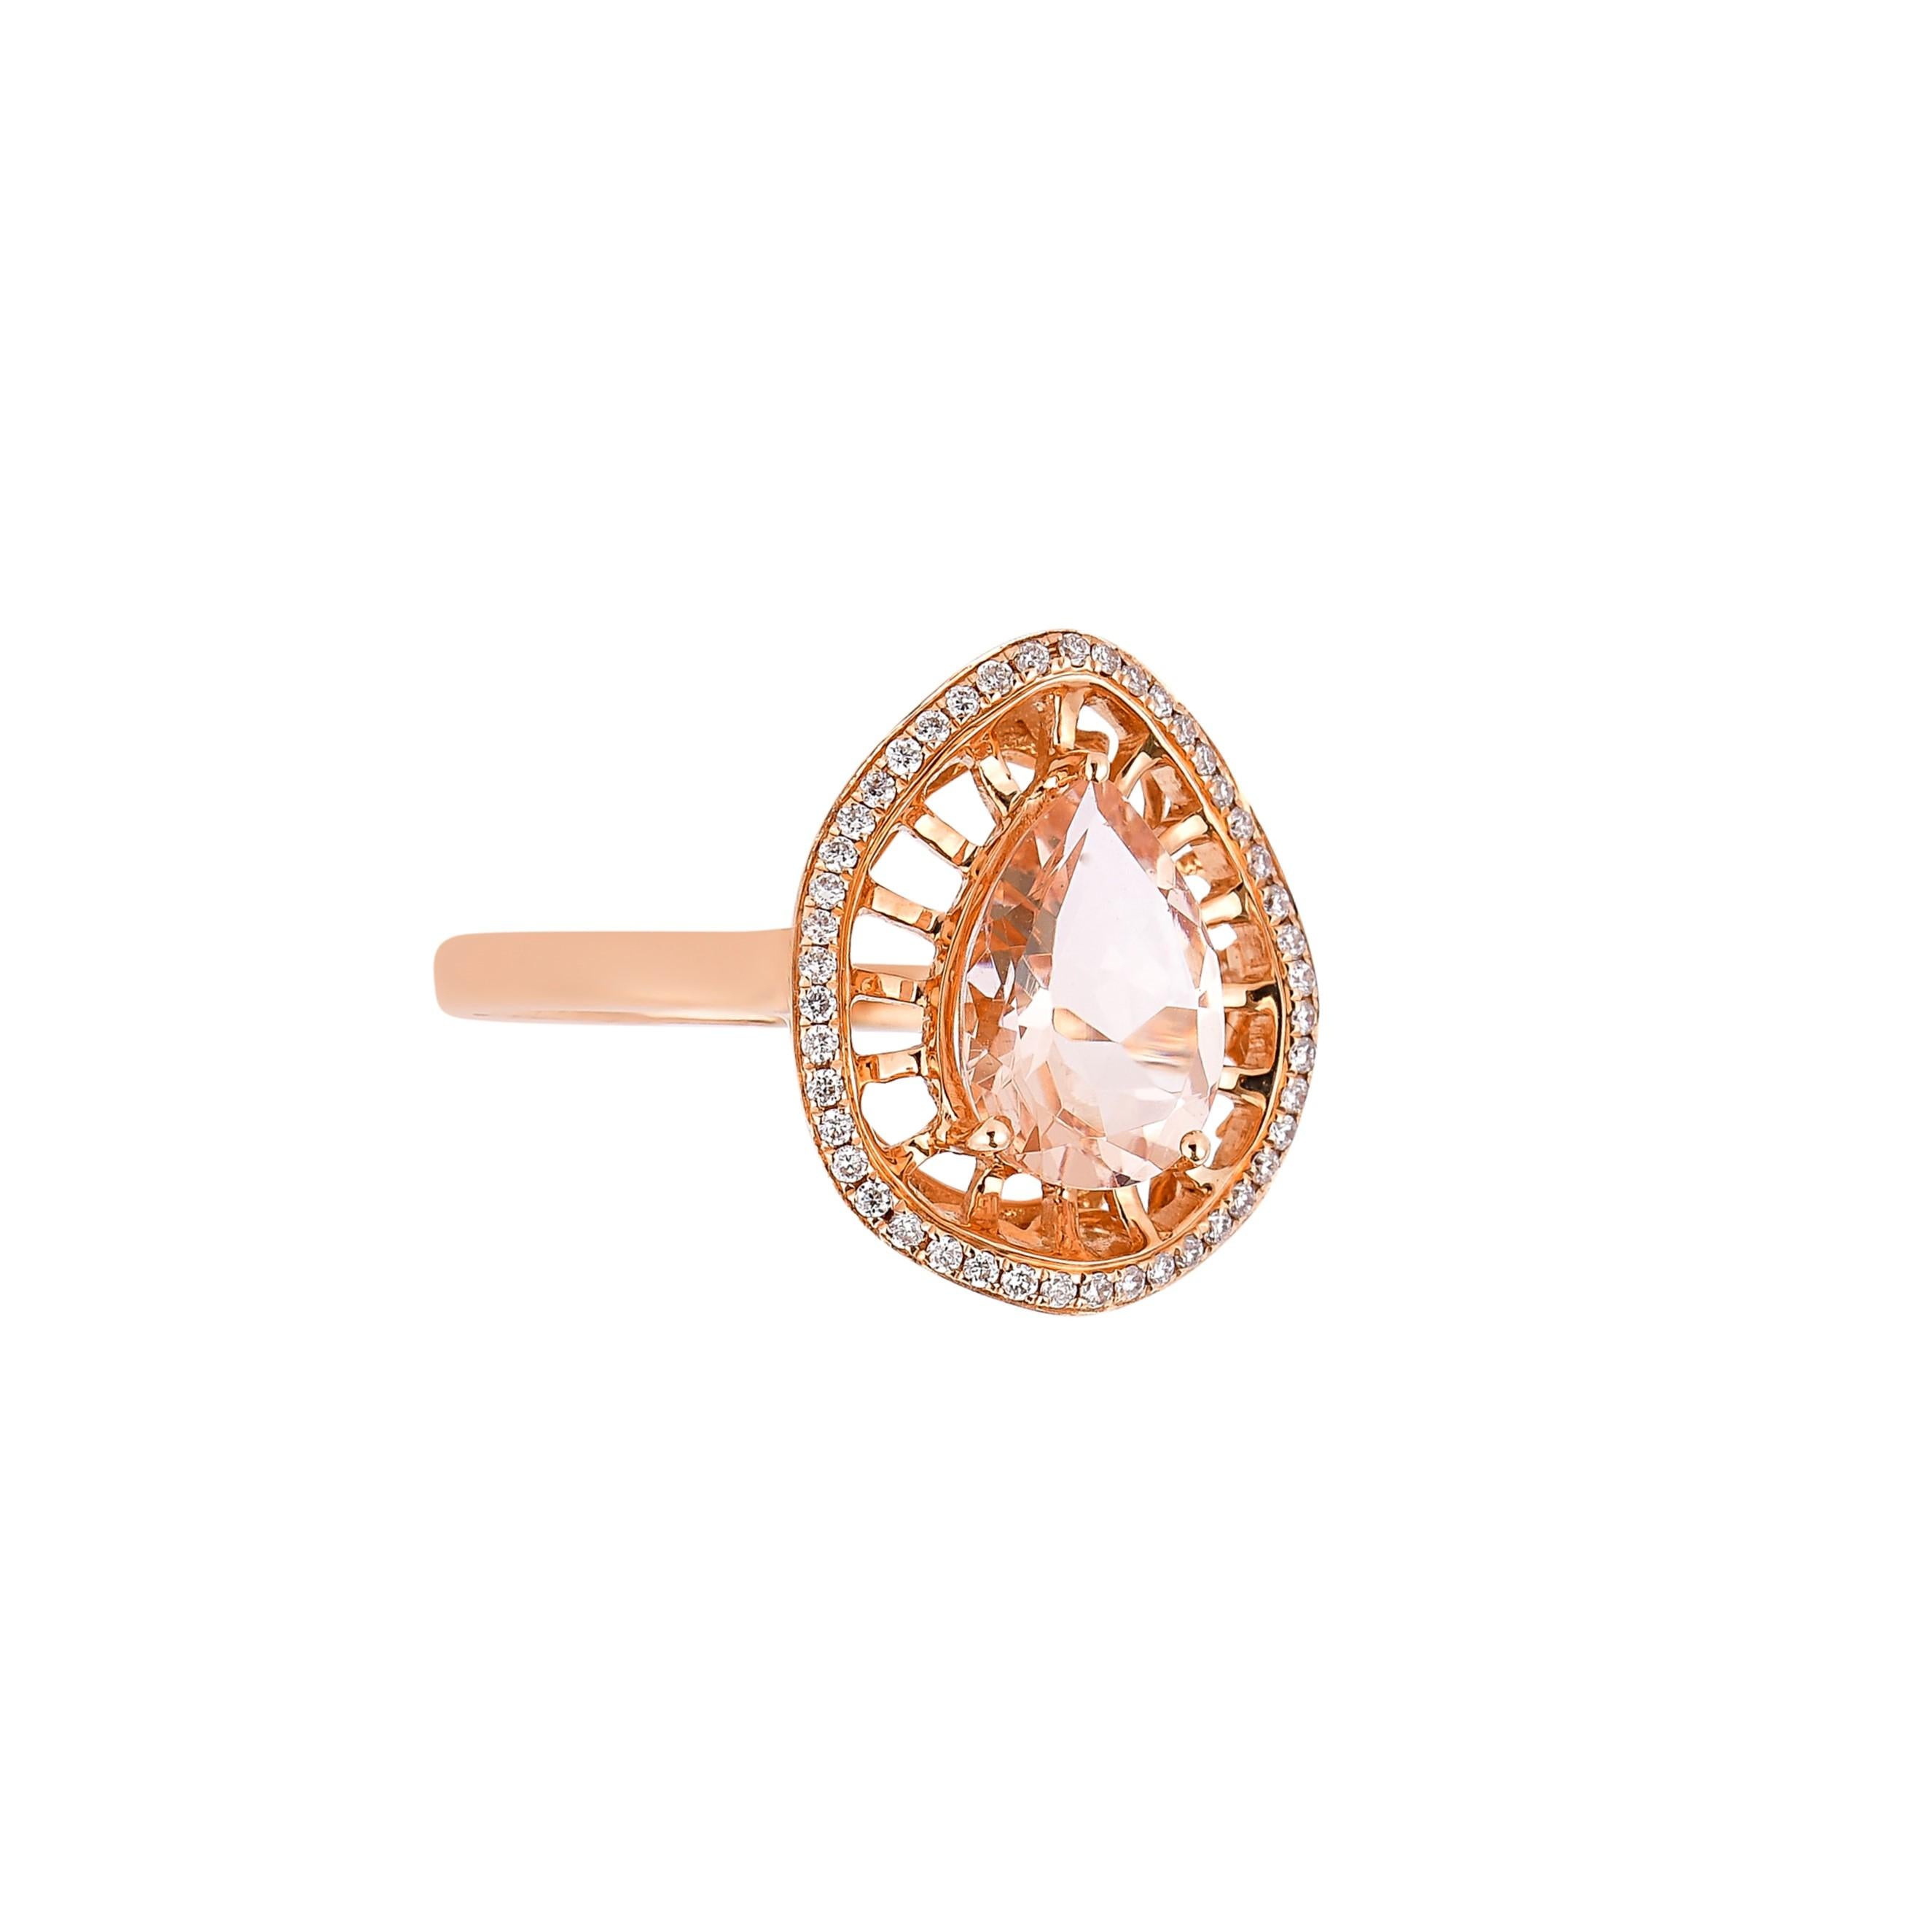 This collection features an array of magnificent morganites! Accented with diamonds these rings are made in rose gold and present a classic yet elegant look. 

Classic morganite ring in 18K rose gold with diamonds. 

Morganite: 1.56 carat pear